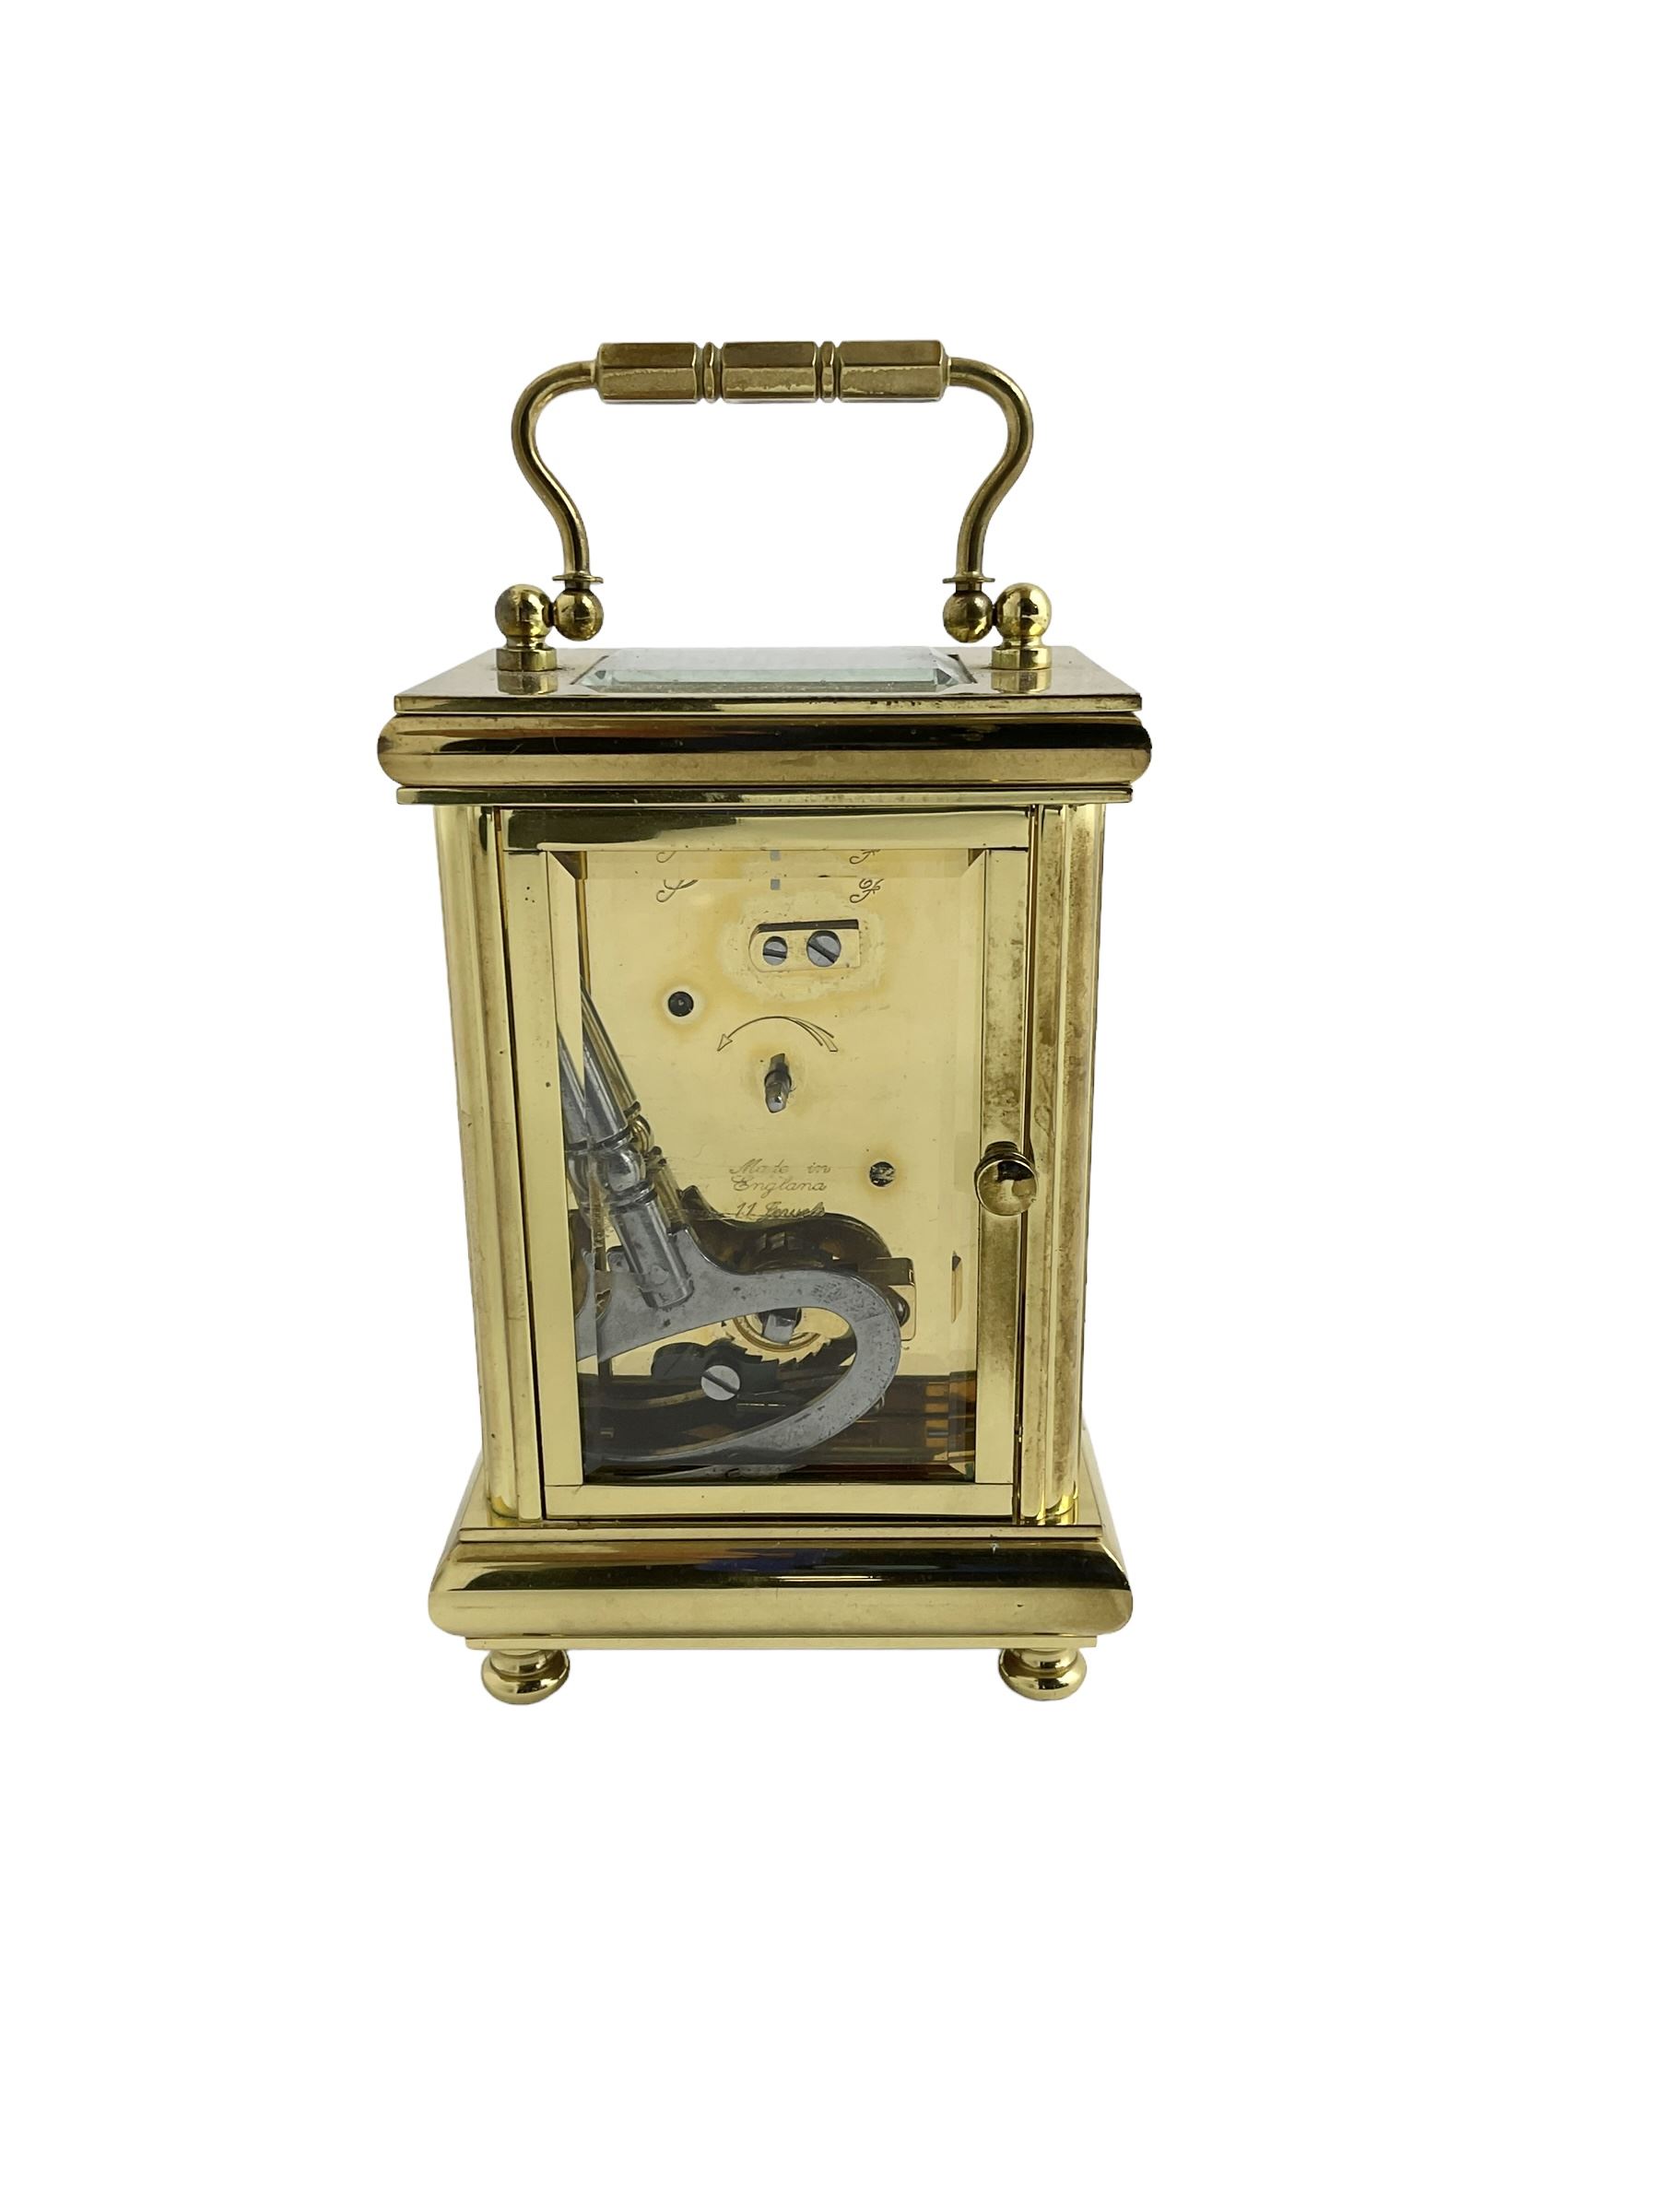 English - contemporary 8-day carriage clock retailed by Martin Dunn - Image 2 of 4